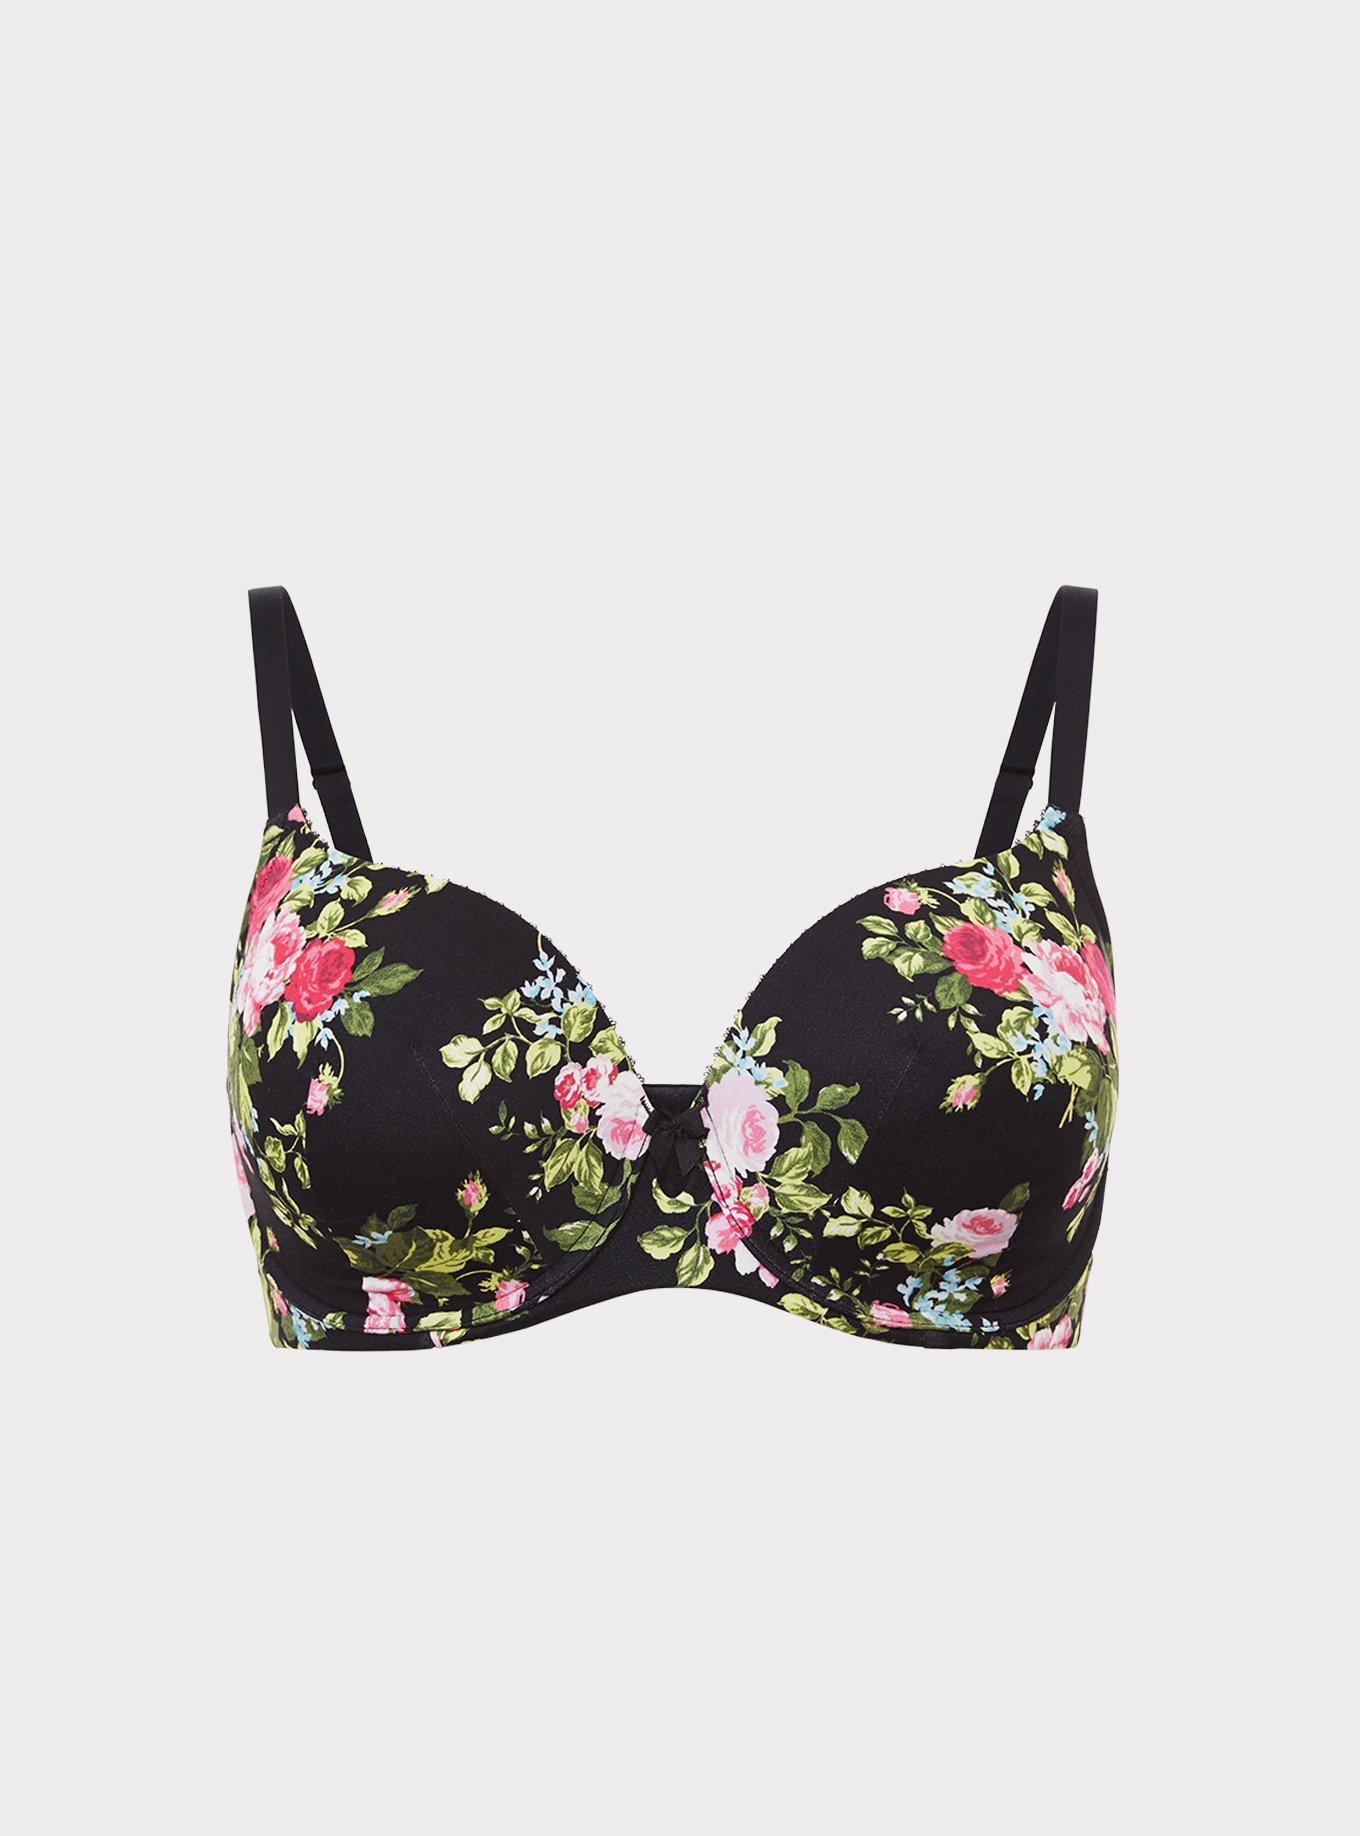 Ordered this bra from Torrid, is it just me or is the print